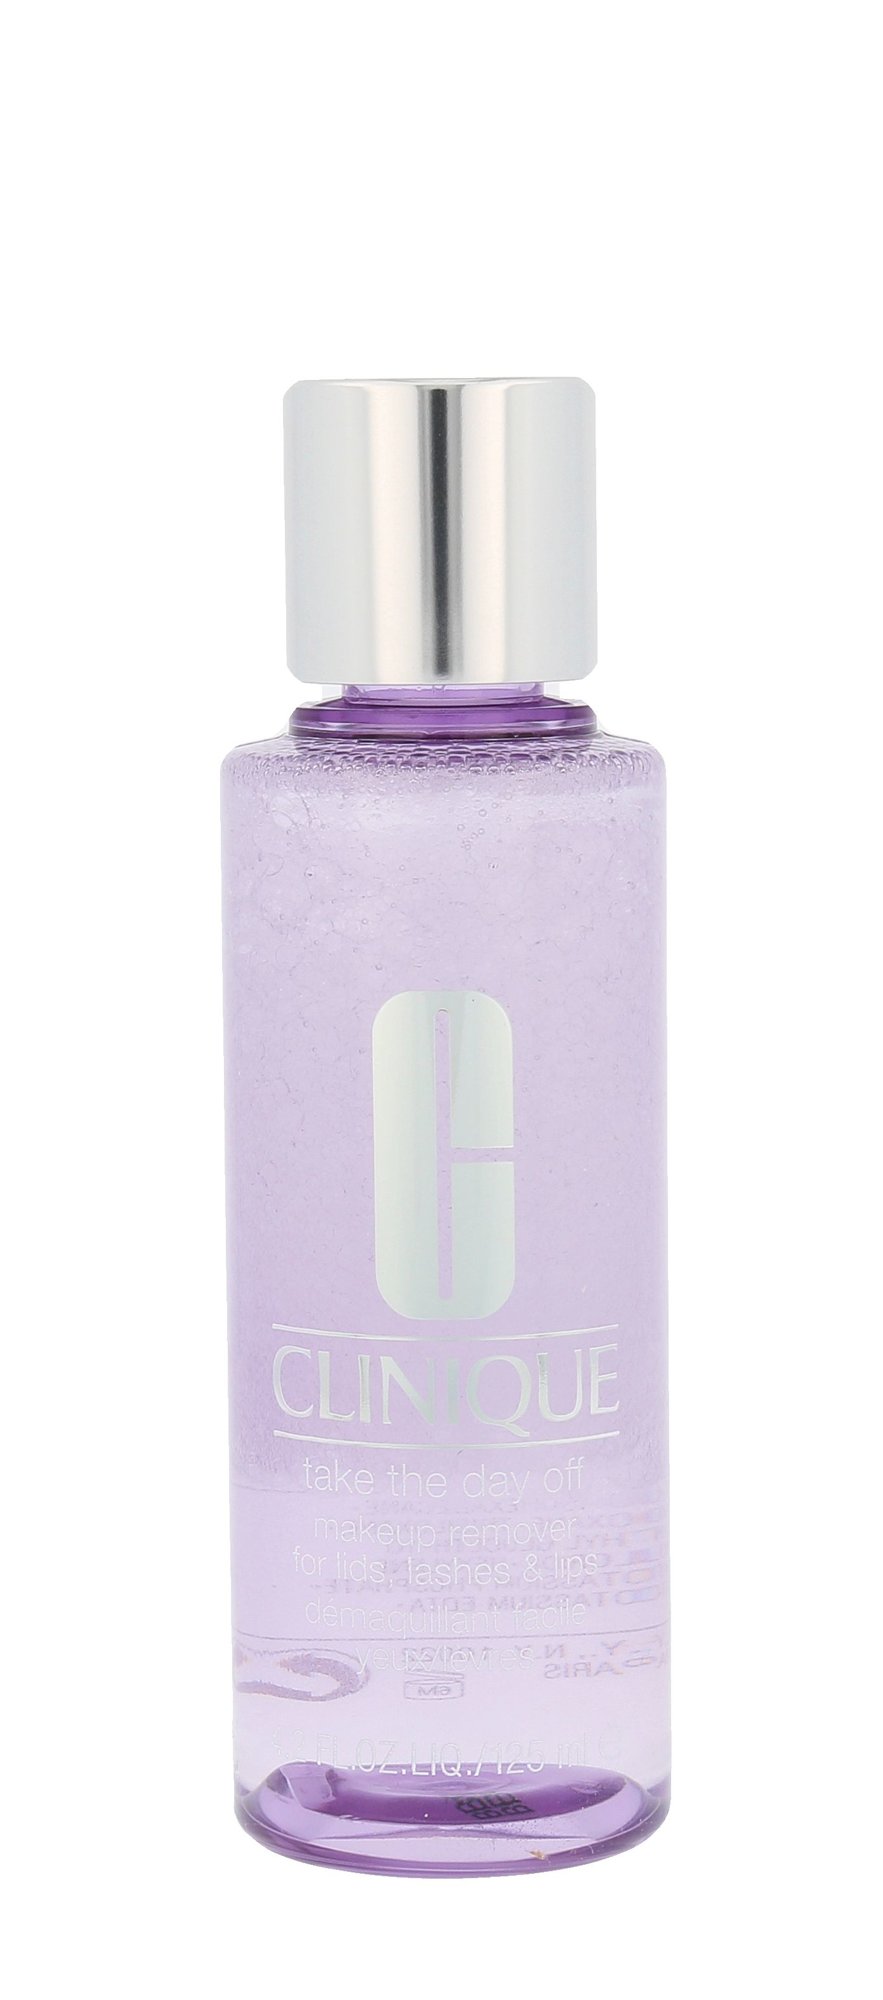 Clinique Take the Day Off Remover Makeup For Lids Lashes